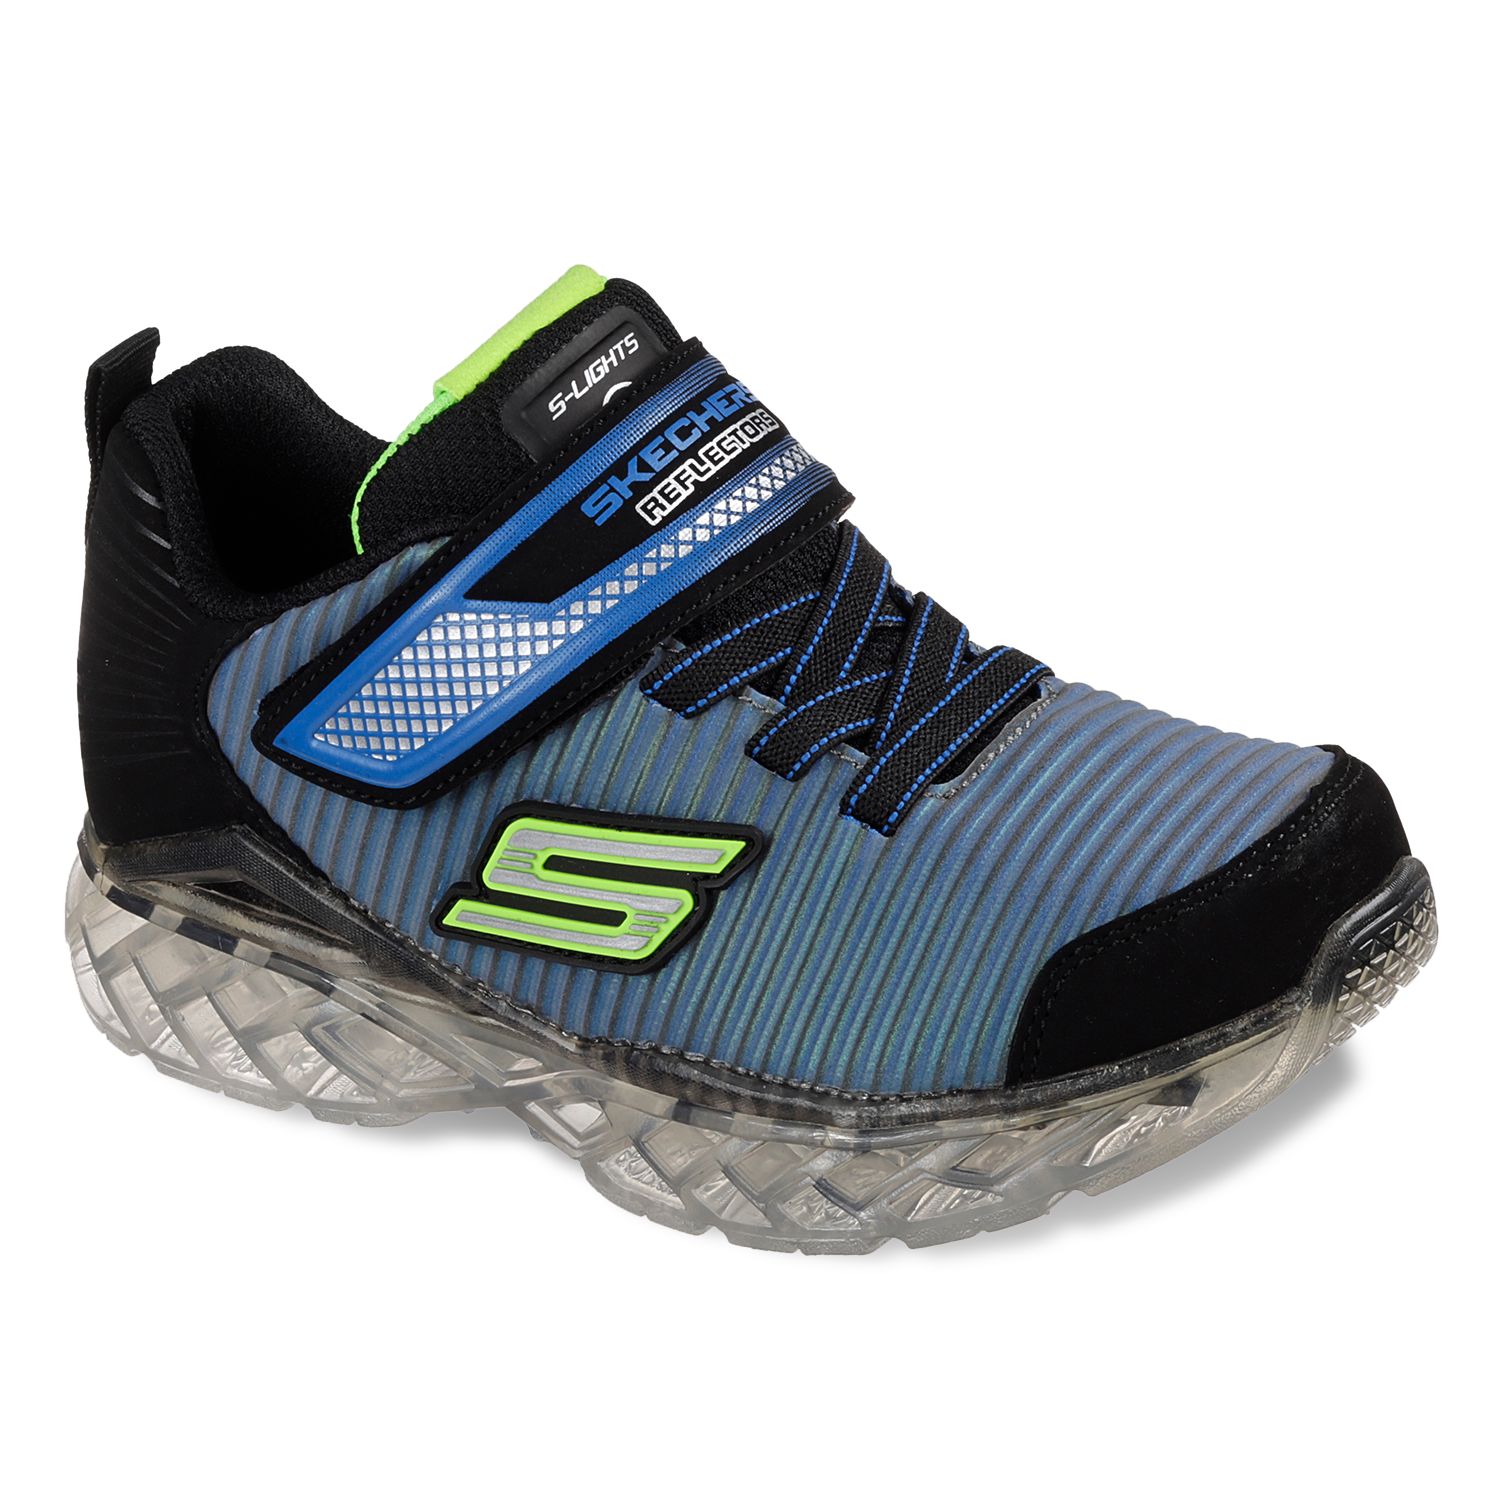 sketchers boys light up trainers